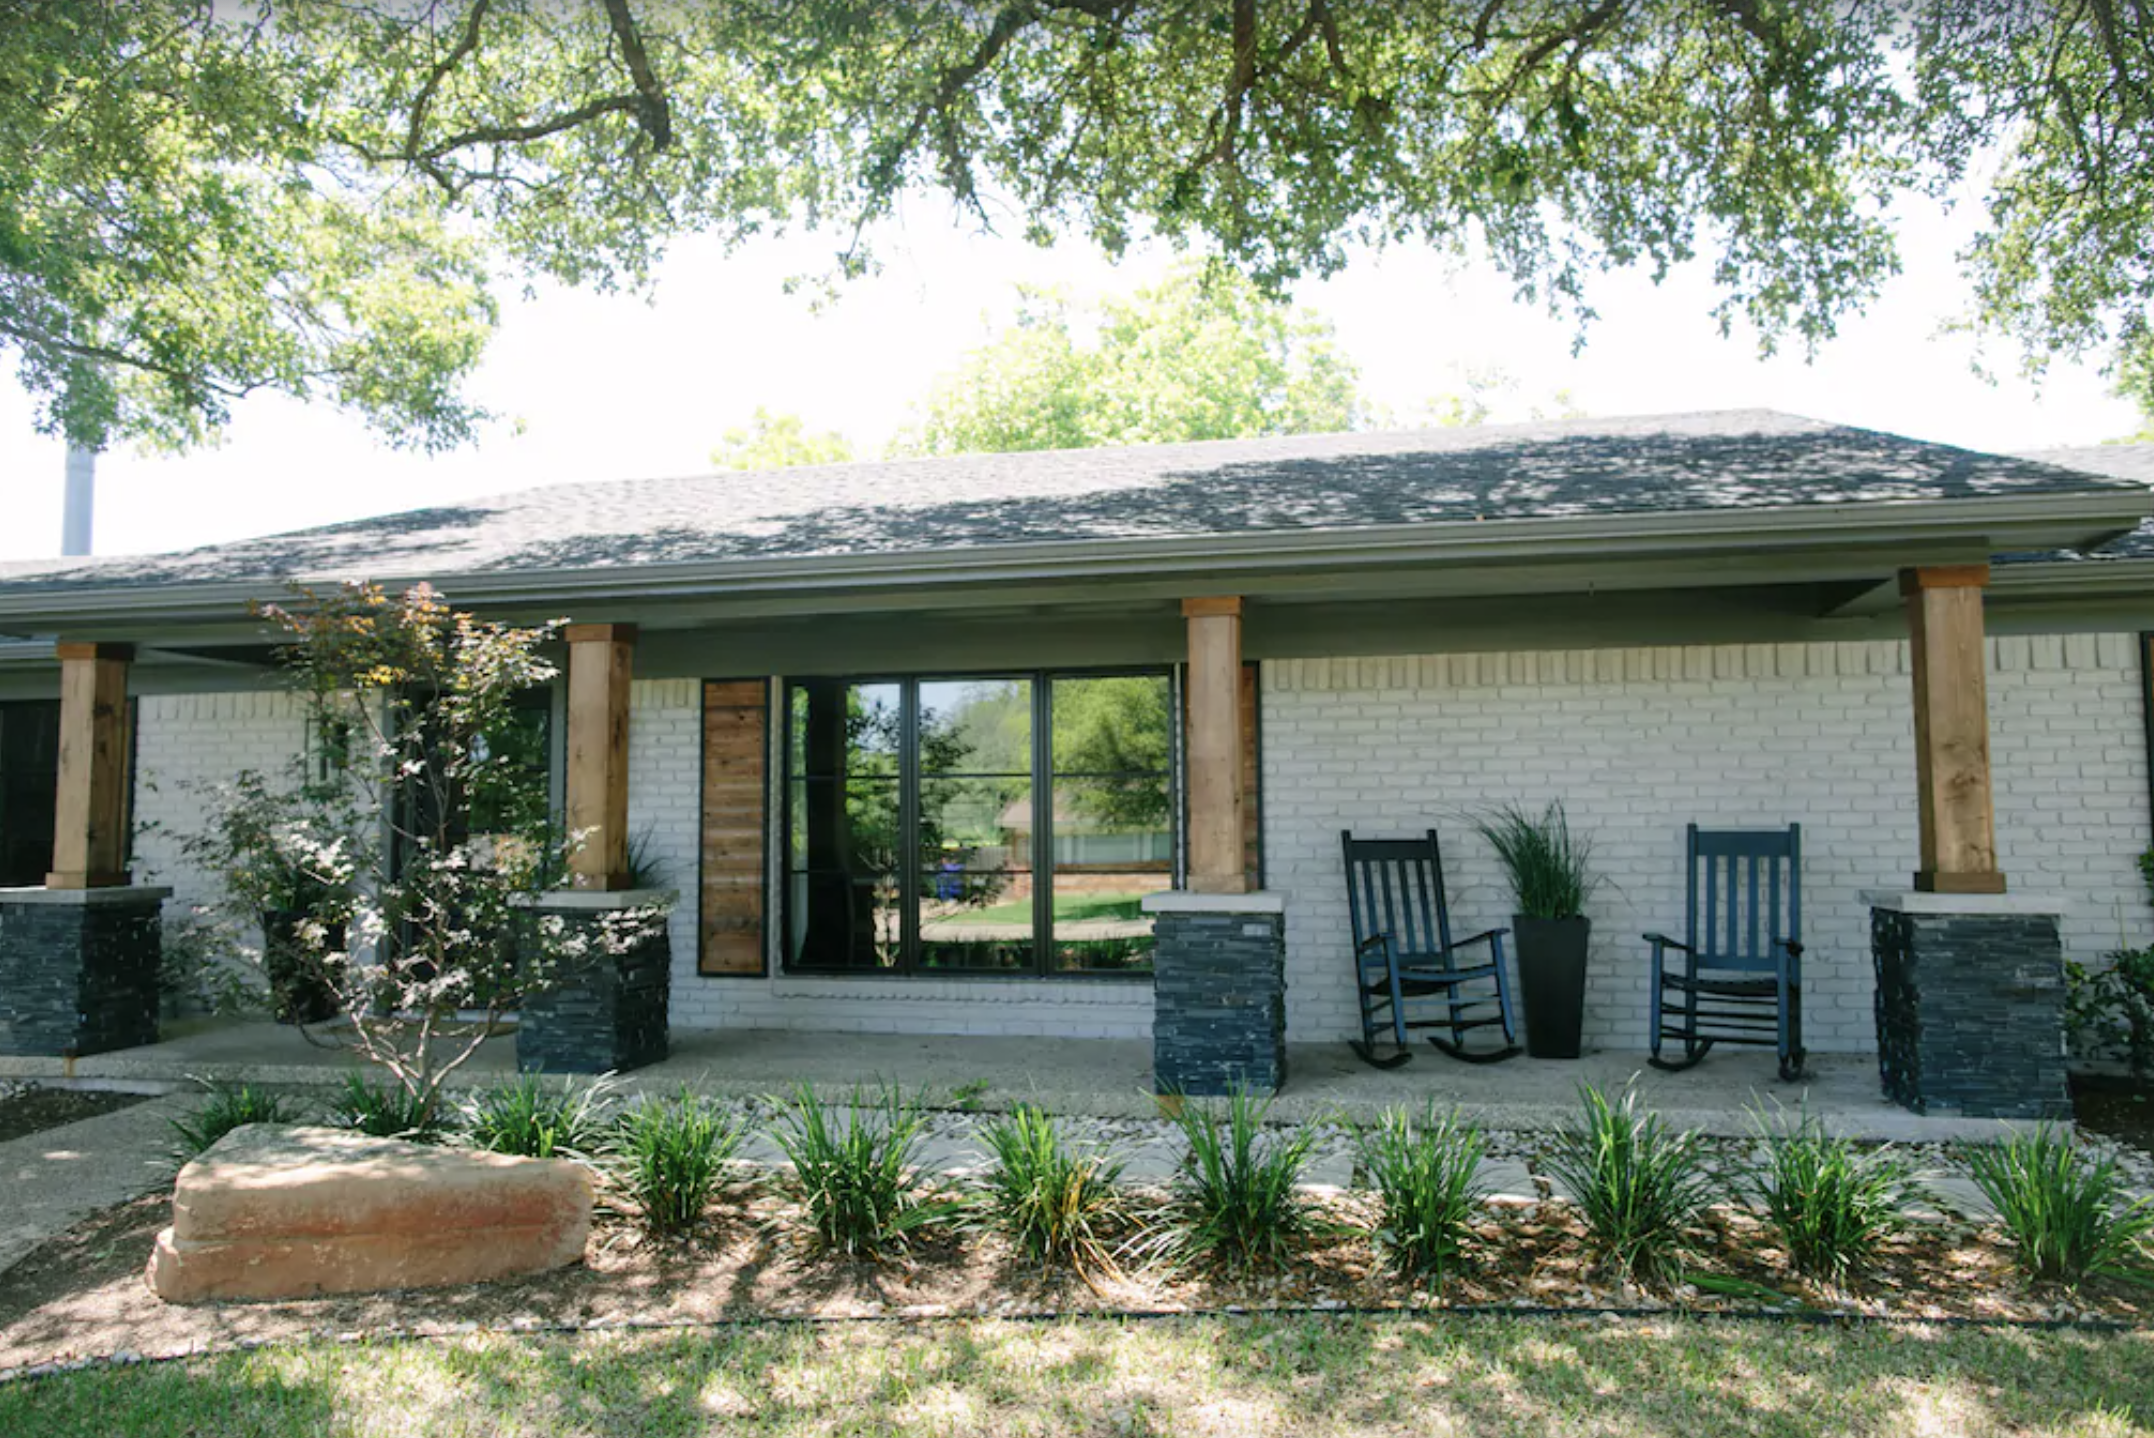 13 'Fixer Upper' That Are Available to Rent on Vrbo & Airbnb